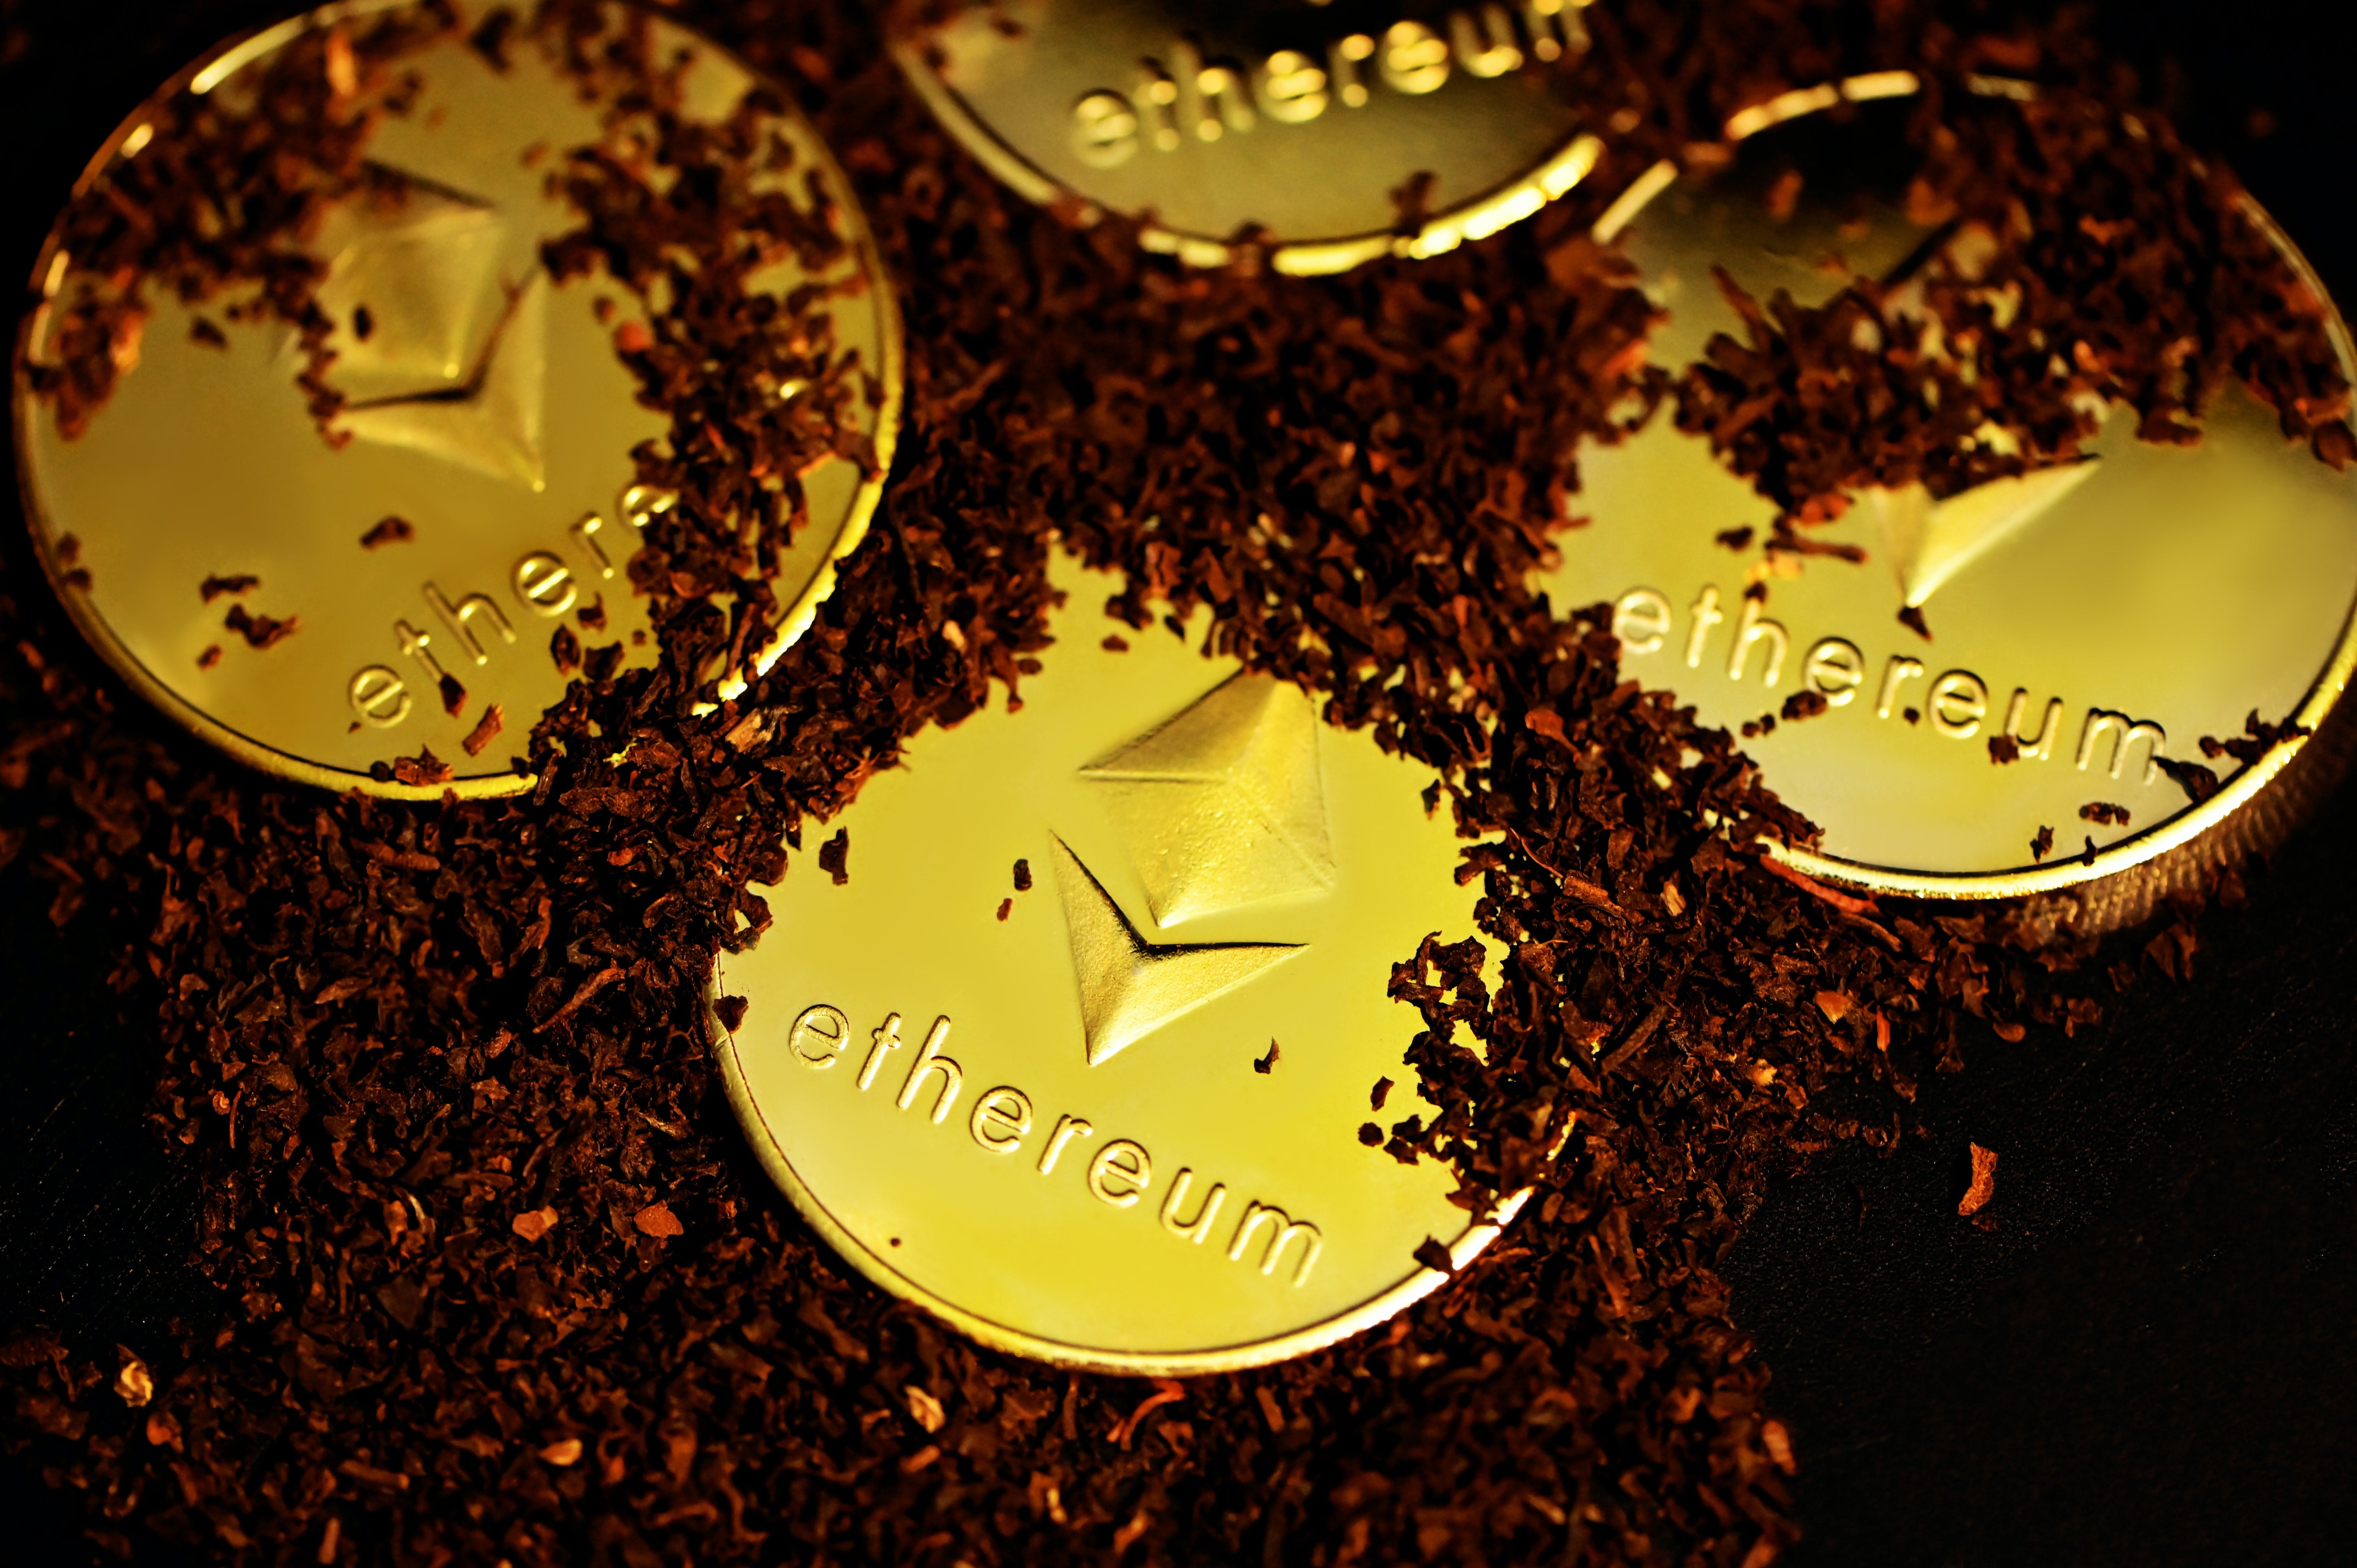 Ethereum in a physical coin representation.